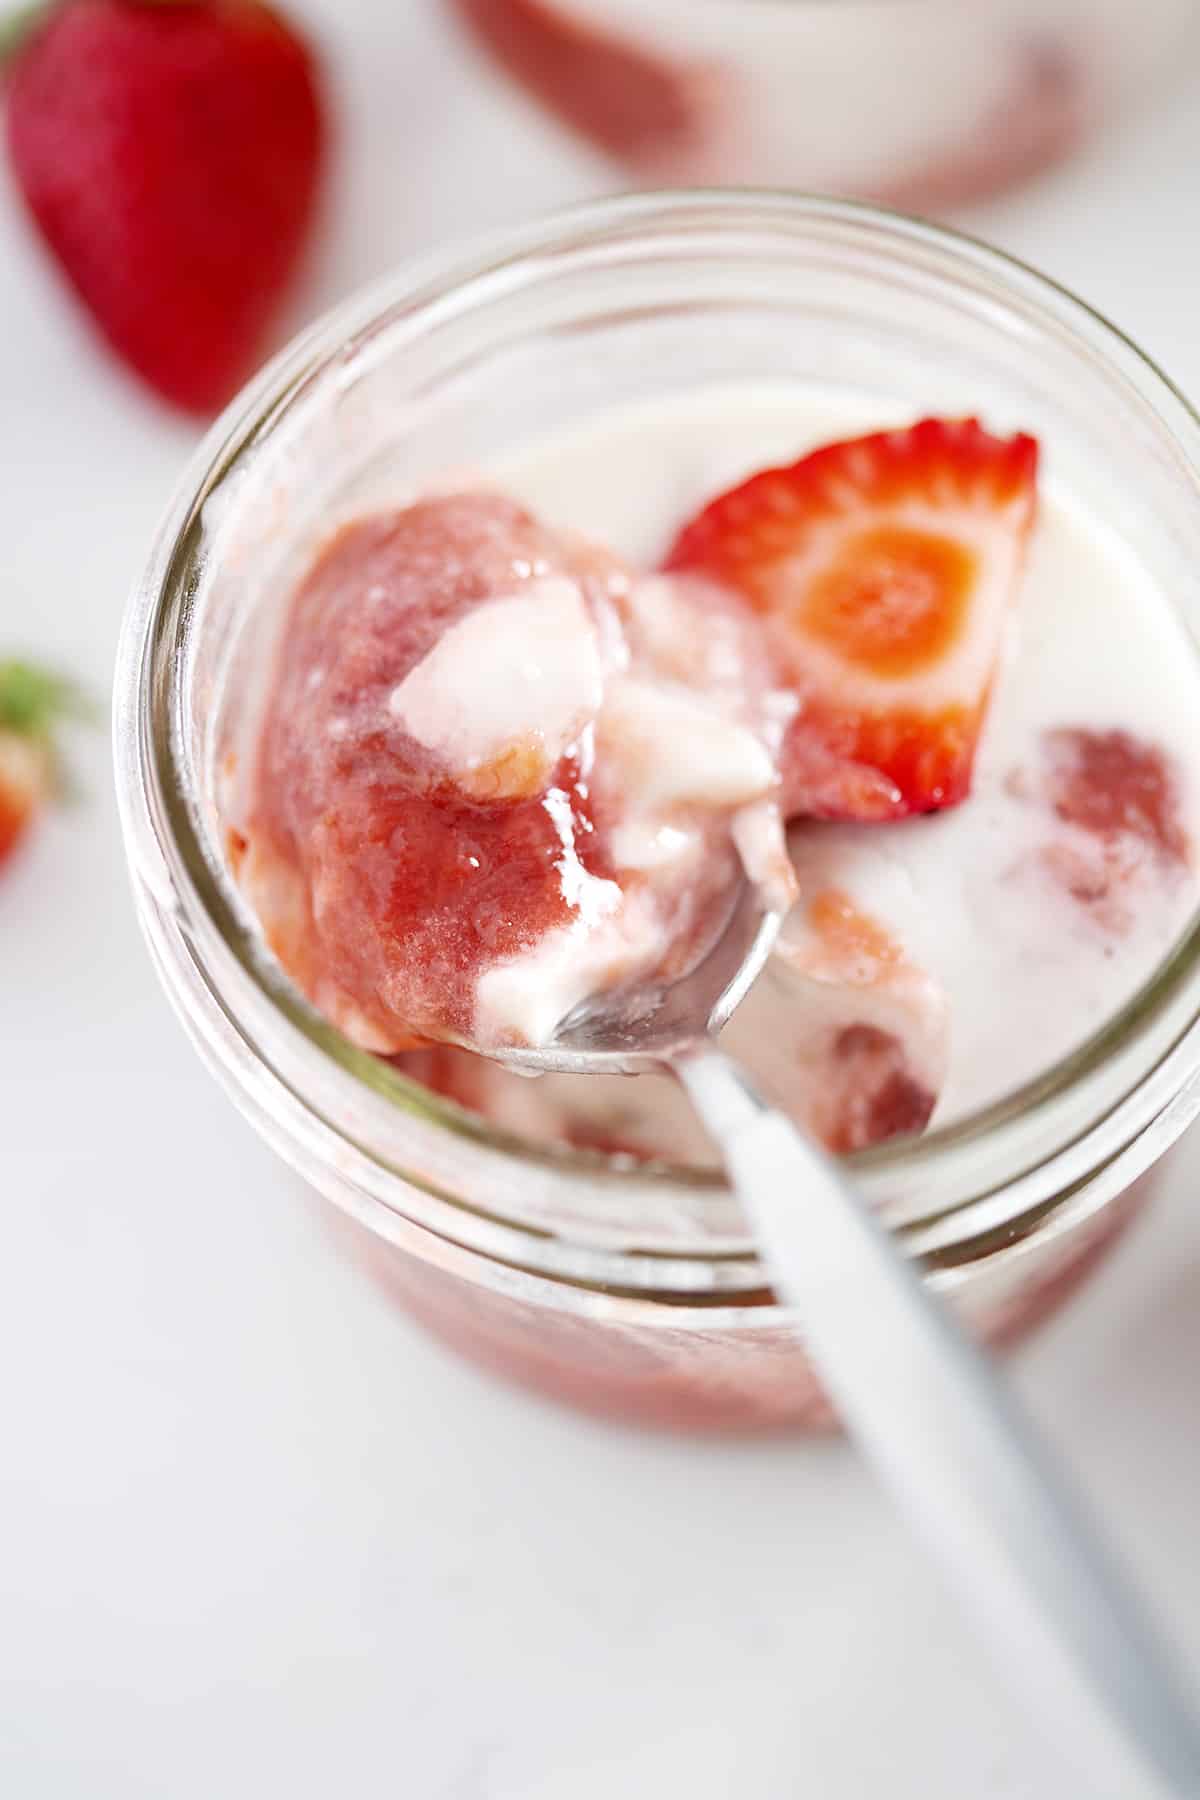 spoonful of AIP Strawberry Rhubarb Panna Cotta with Coconut Milk